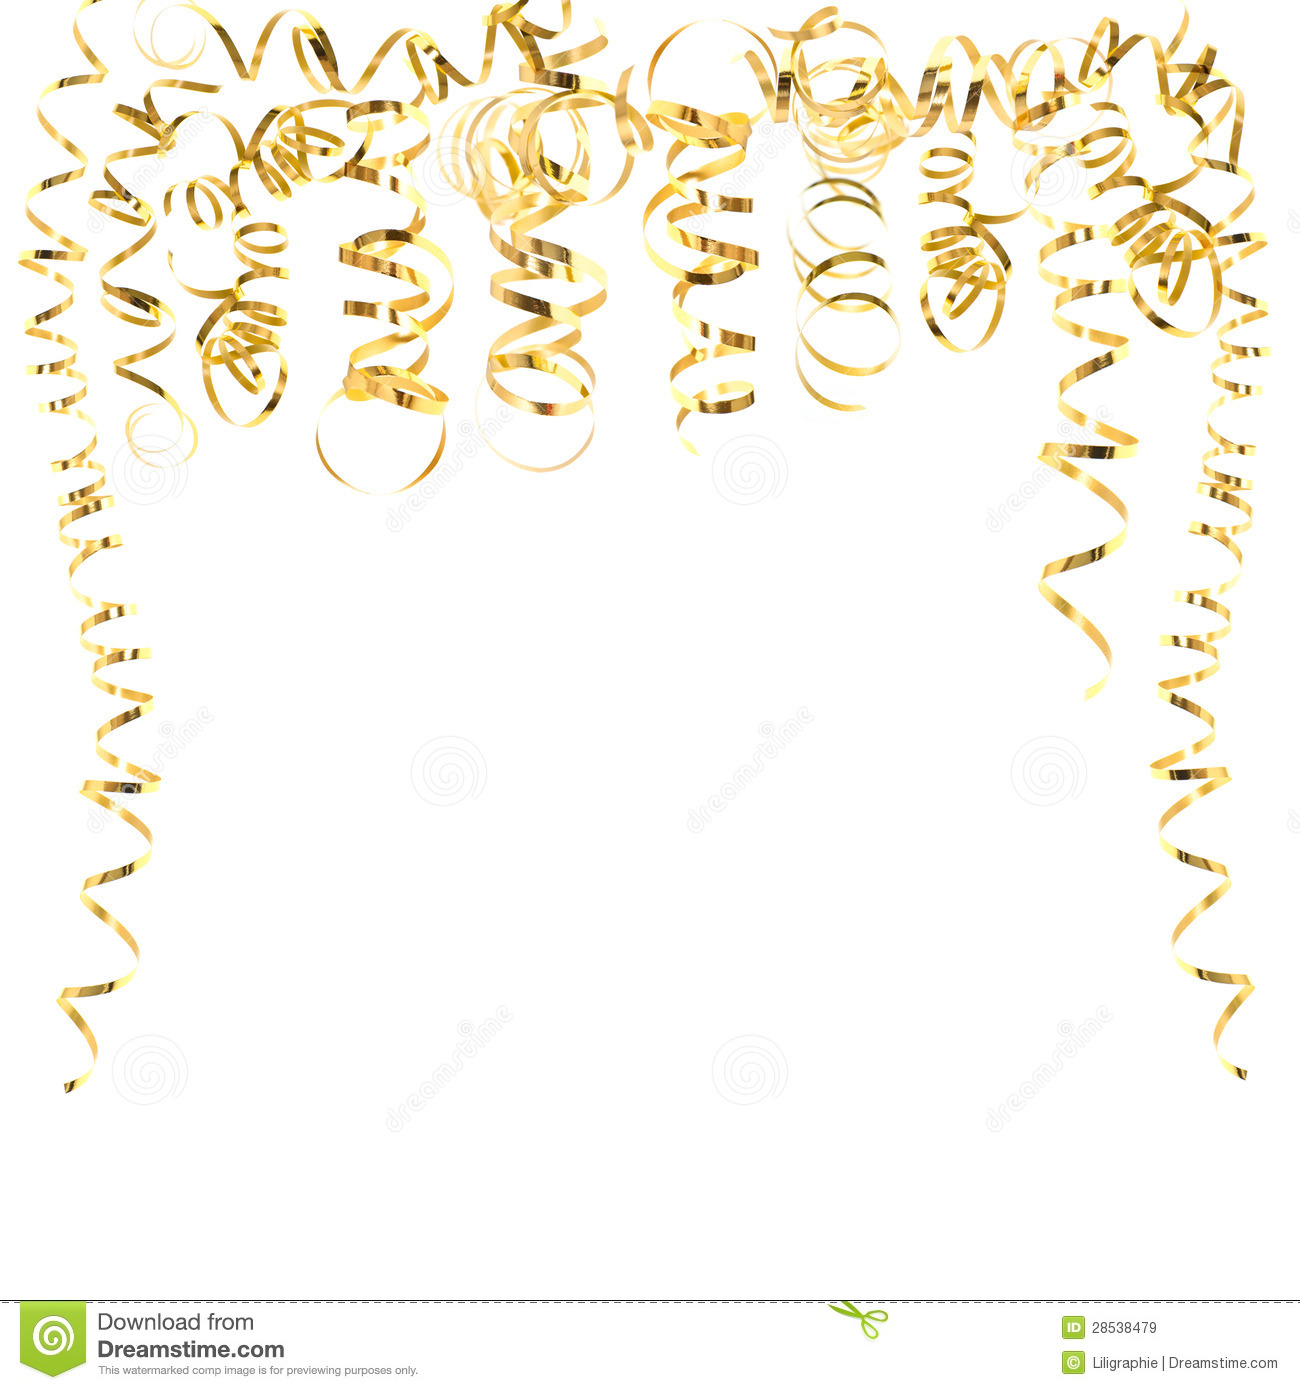 Golden Serpentine Streamers Isolated On White Royalty Free Stock